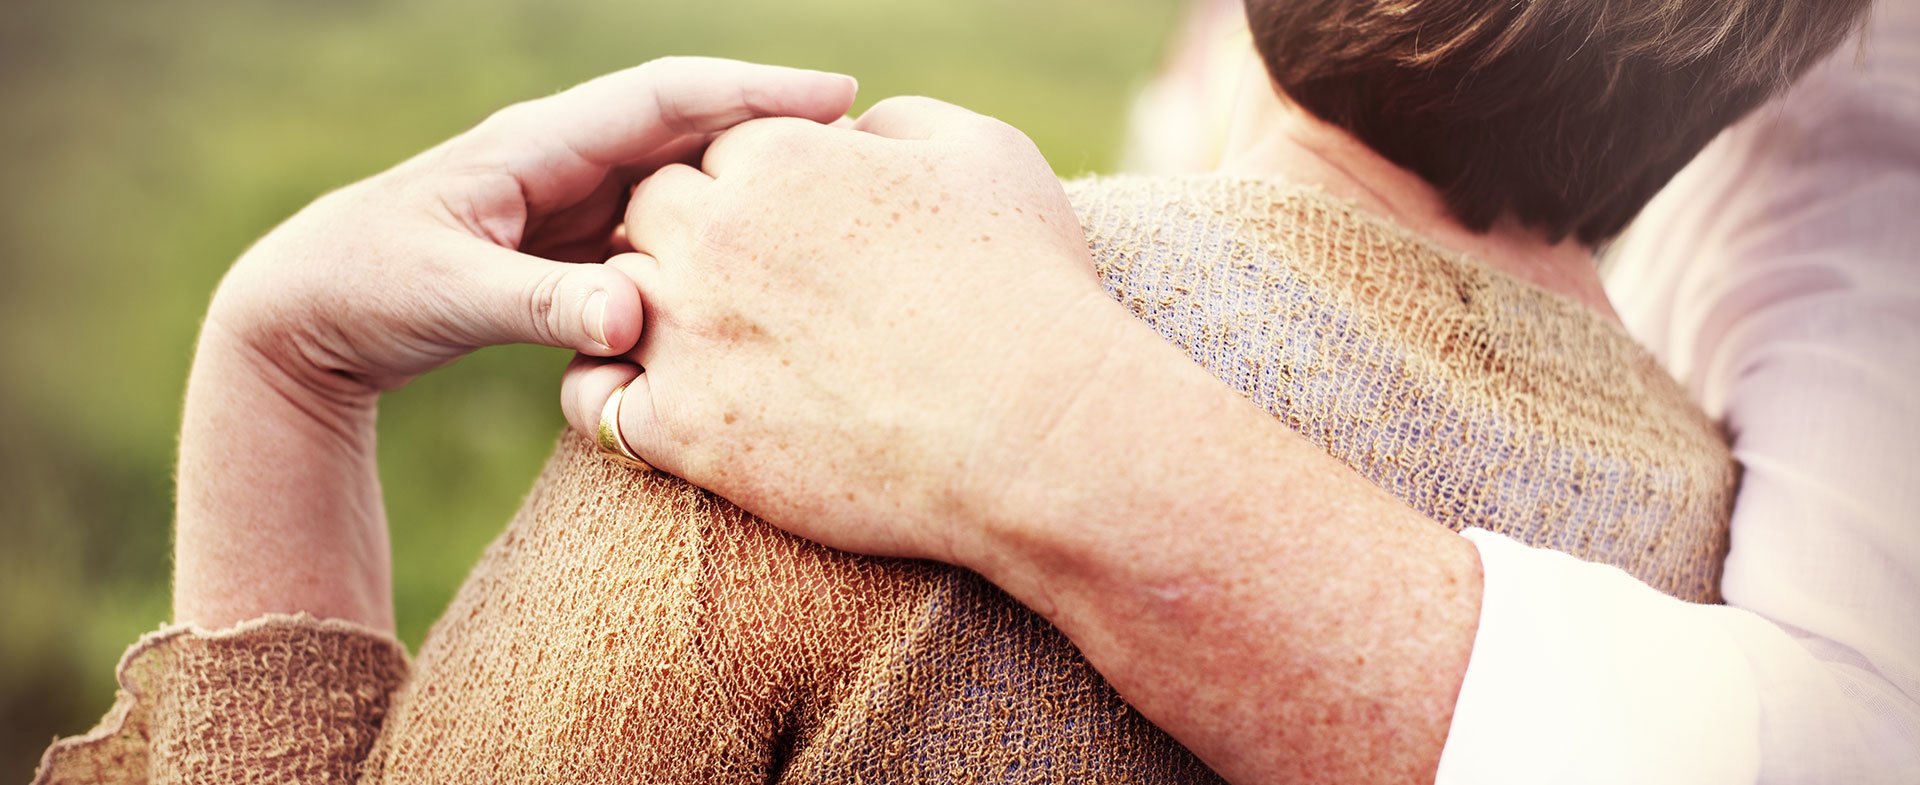 maintaining intimacy while living with cancer